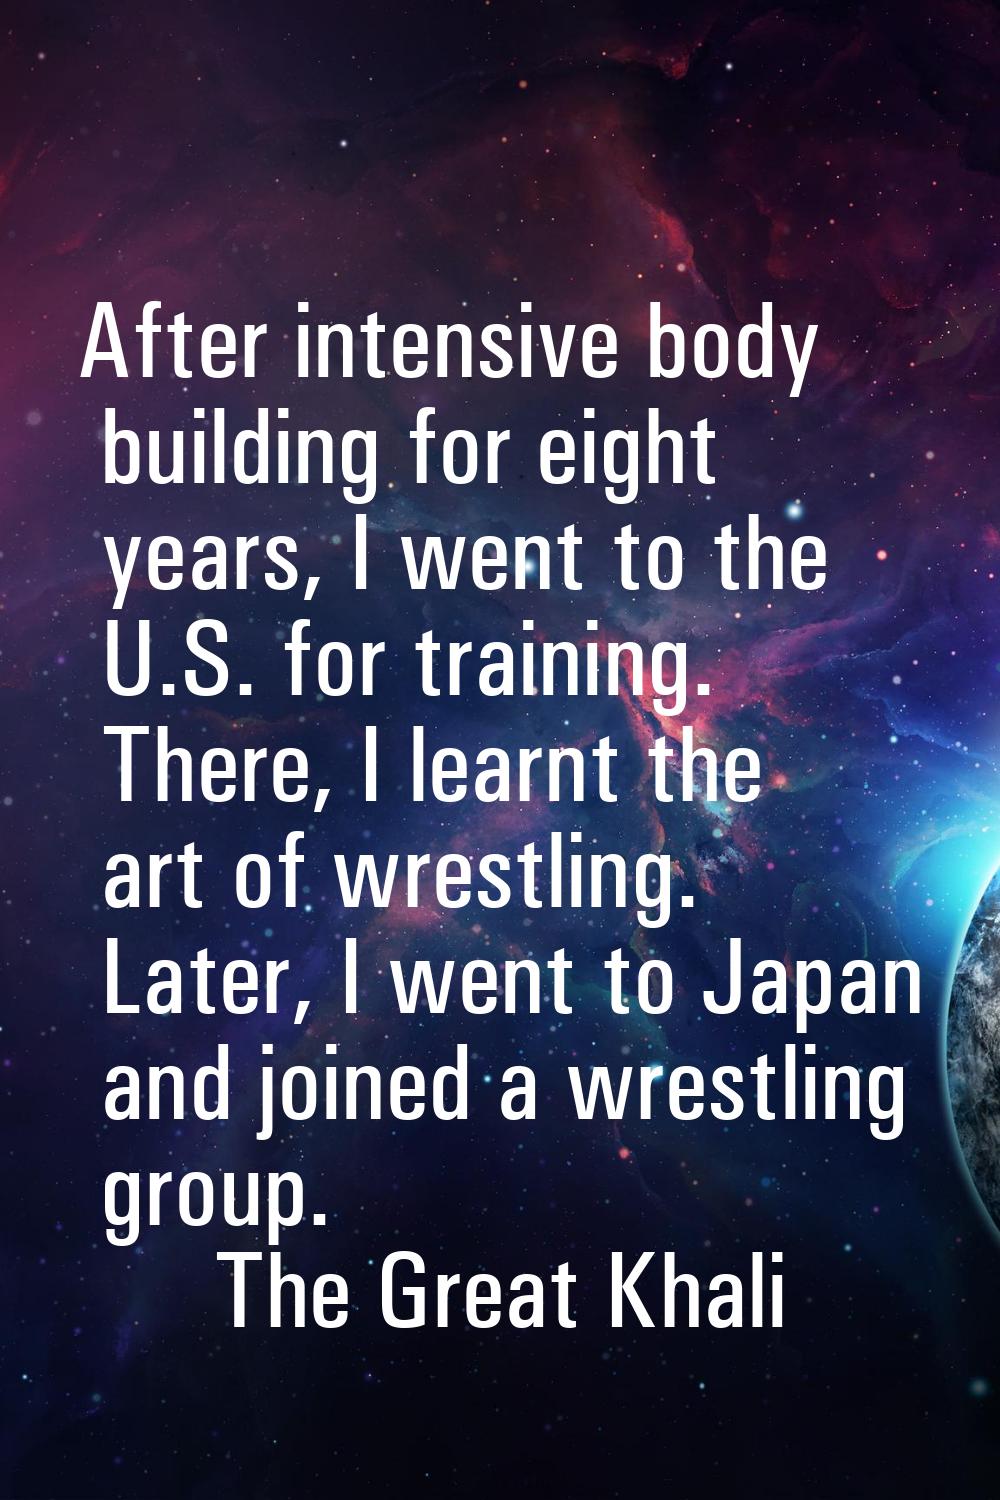 After intensive body building for eight years, I went to the U.S. for training. There, I learnt the